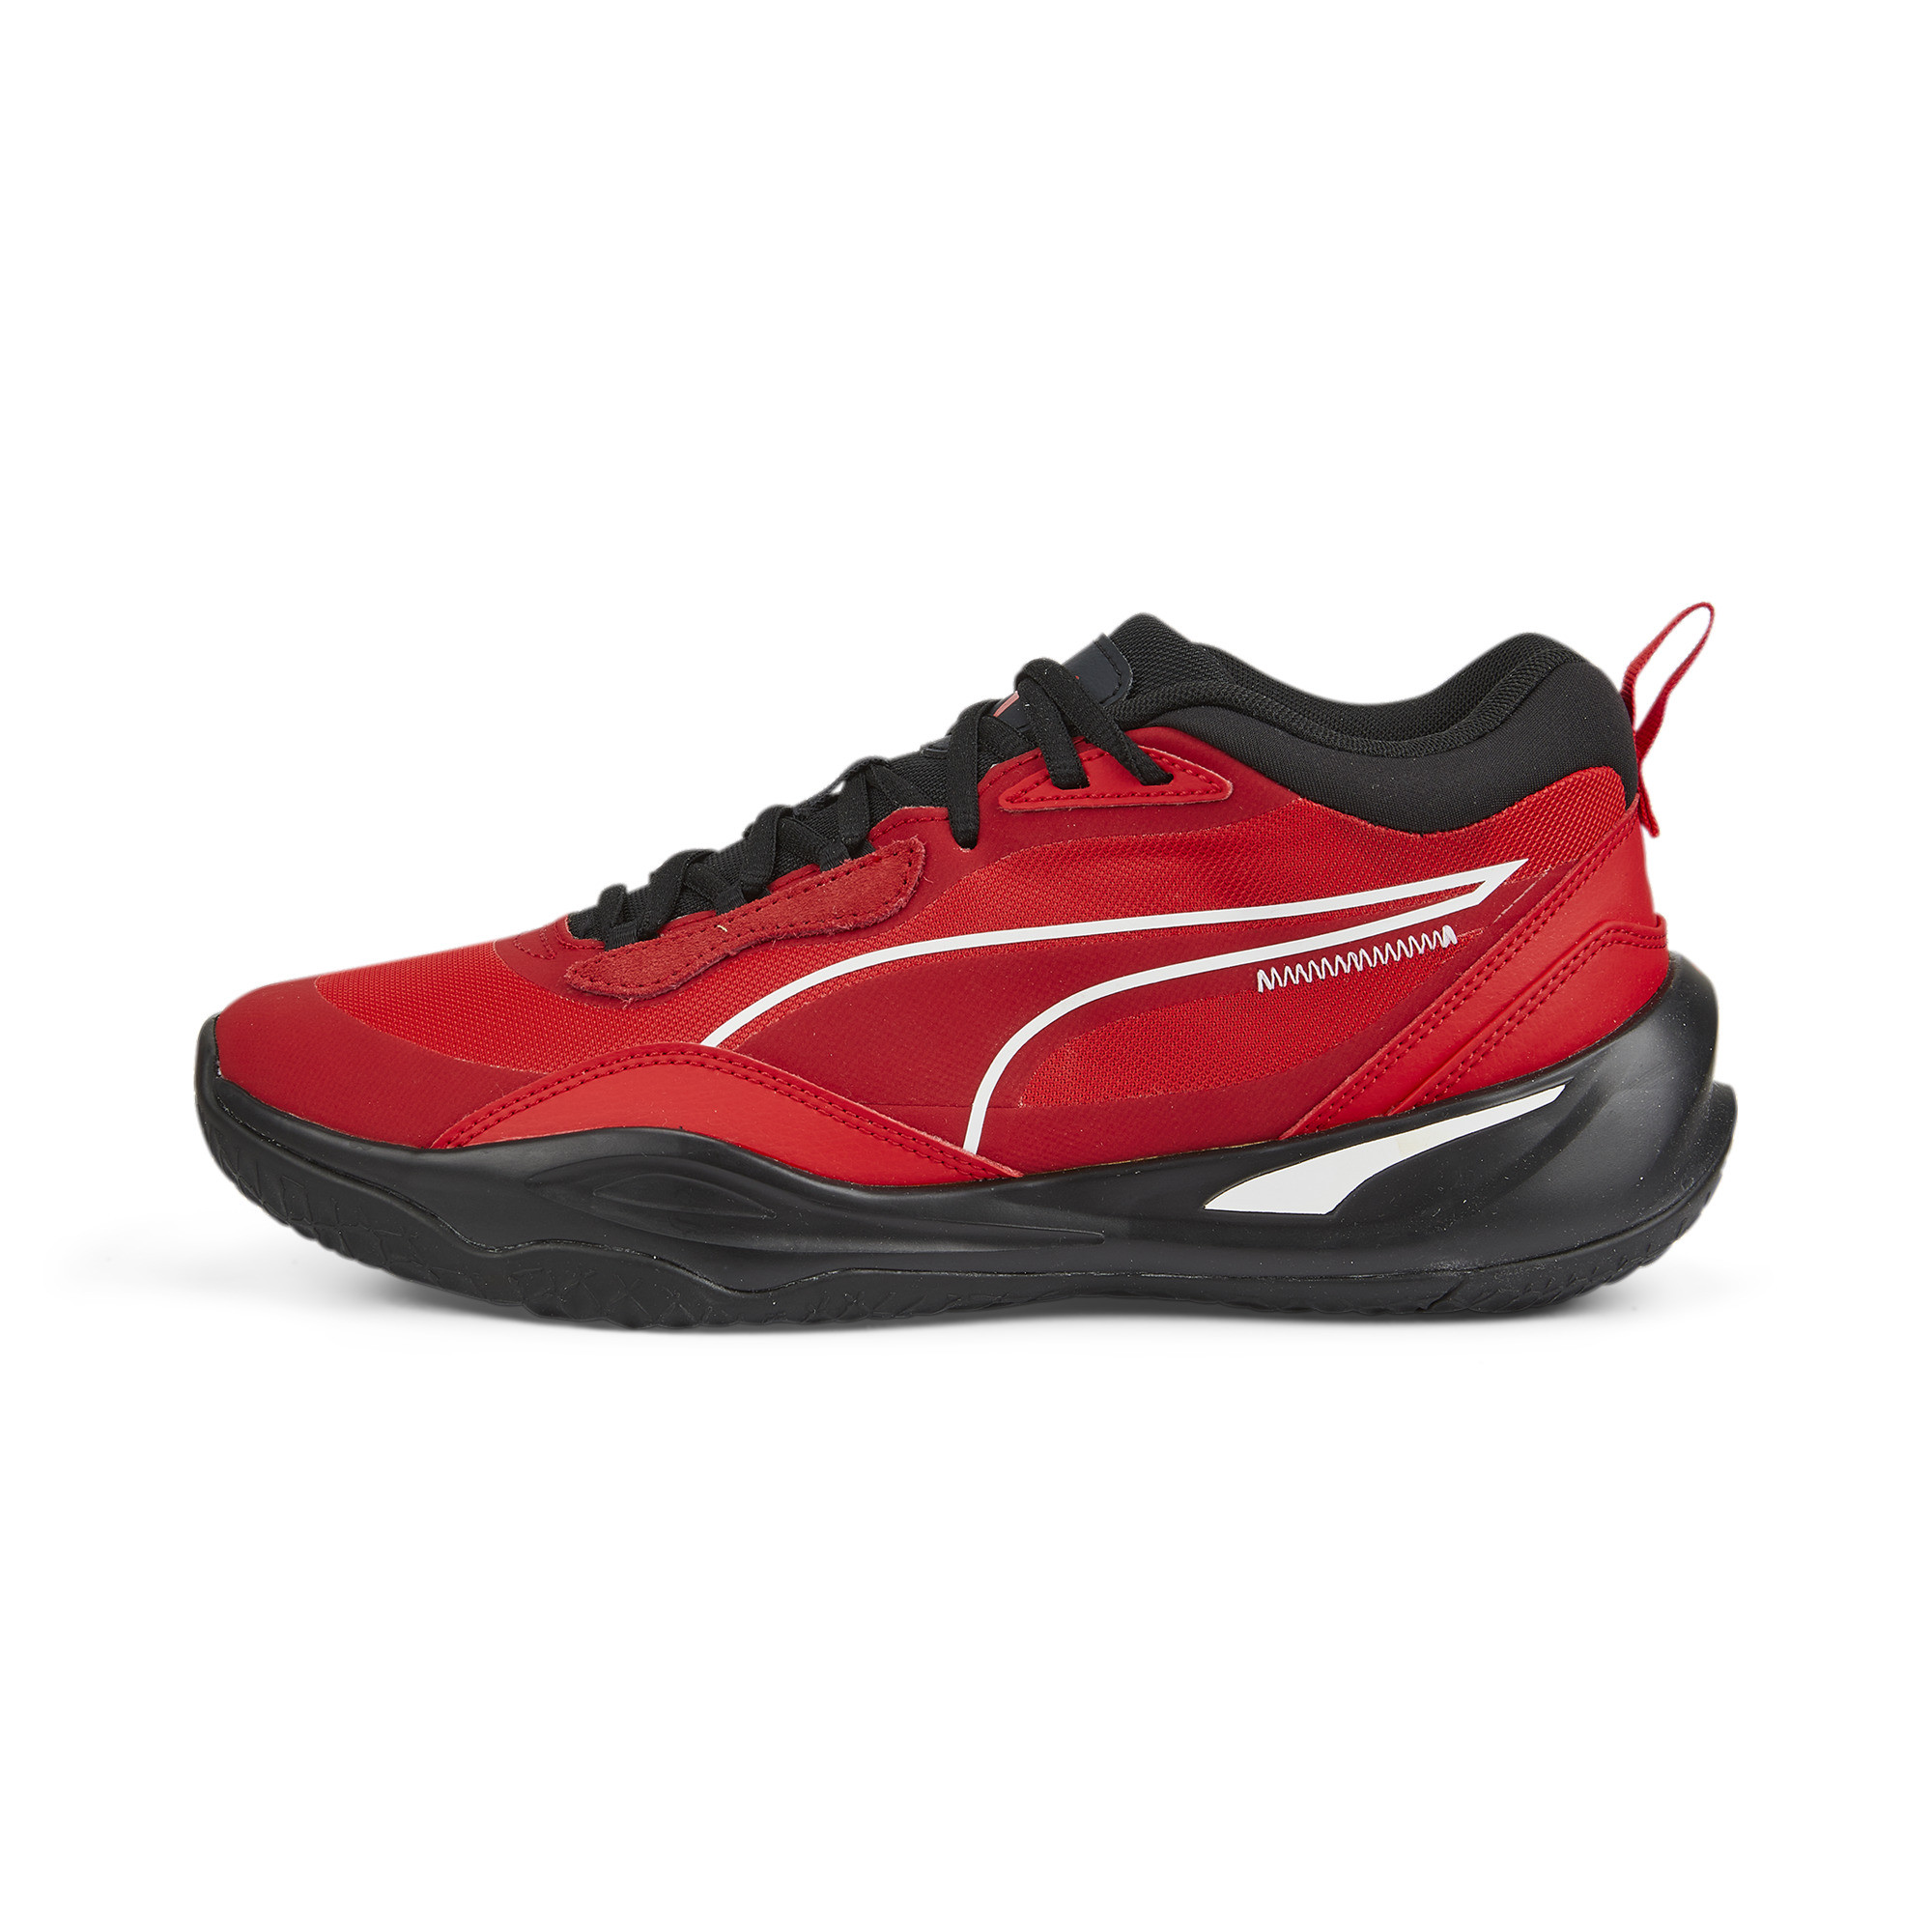 Puma Men's Playmaker Pro Basketball Shoes (Red or White)